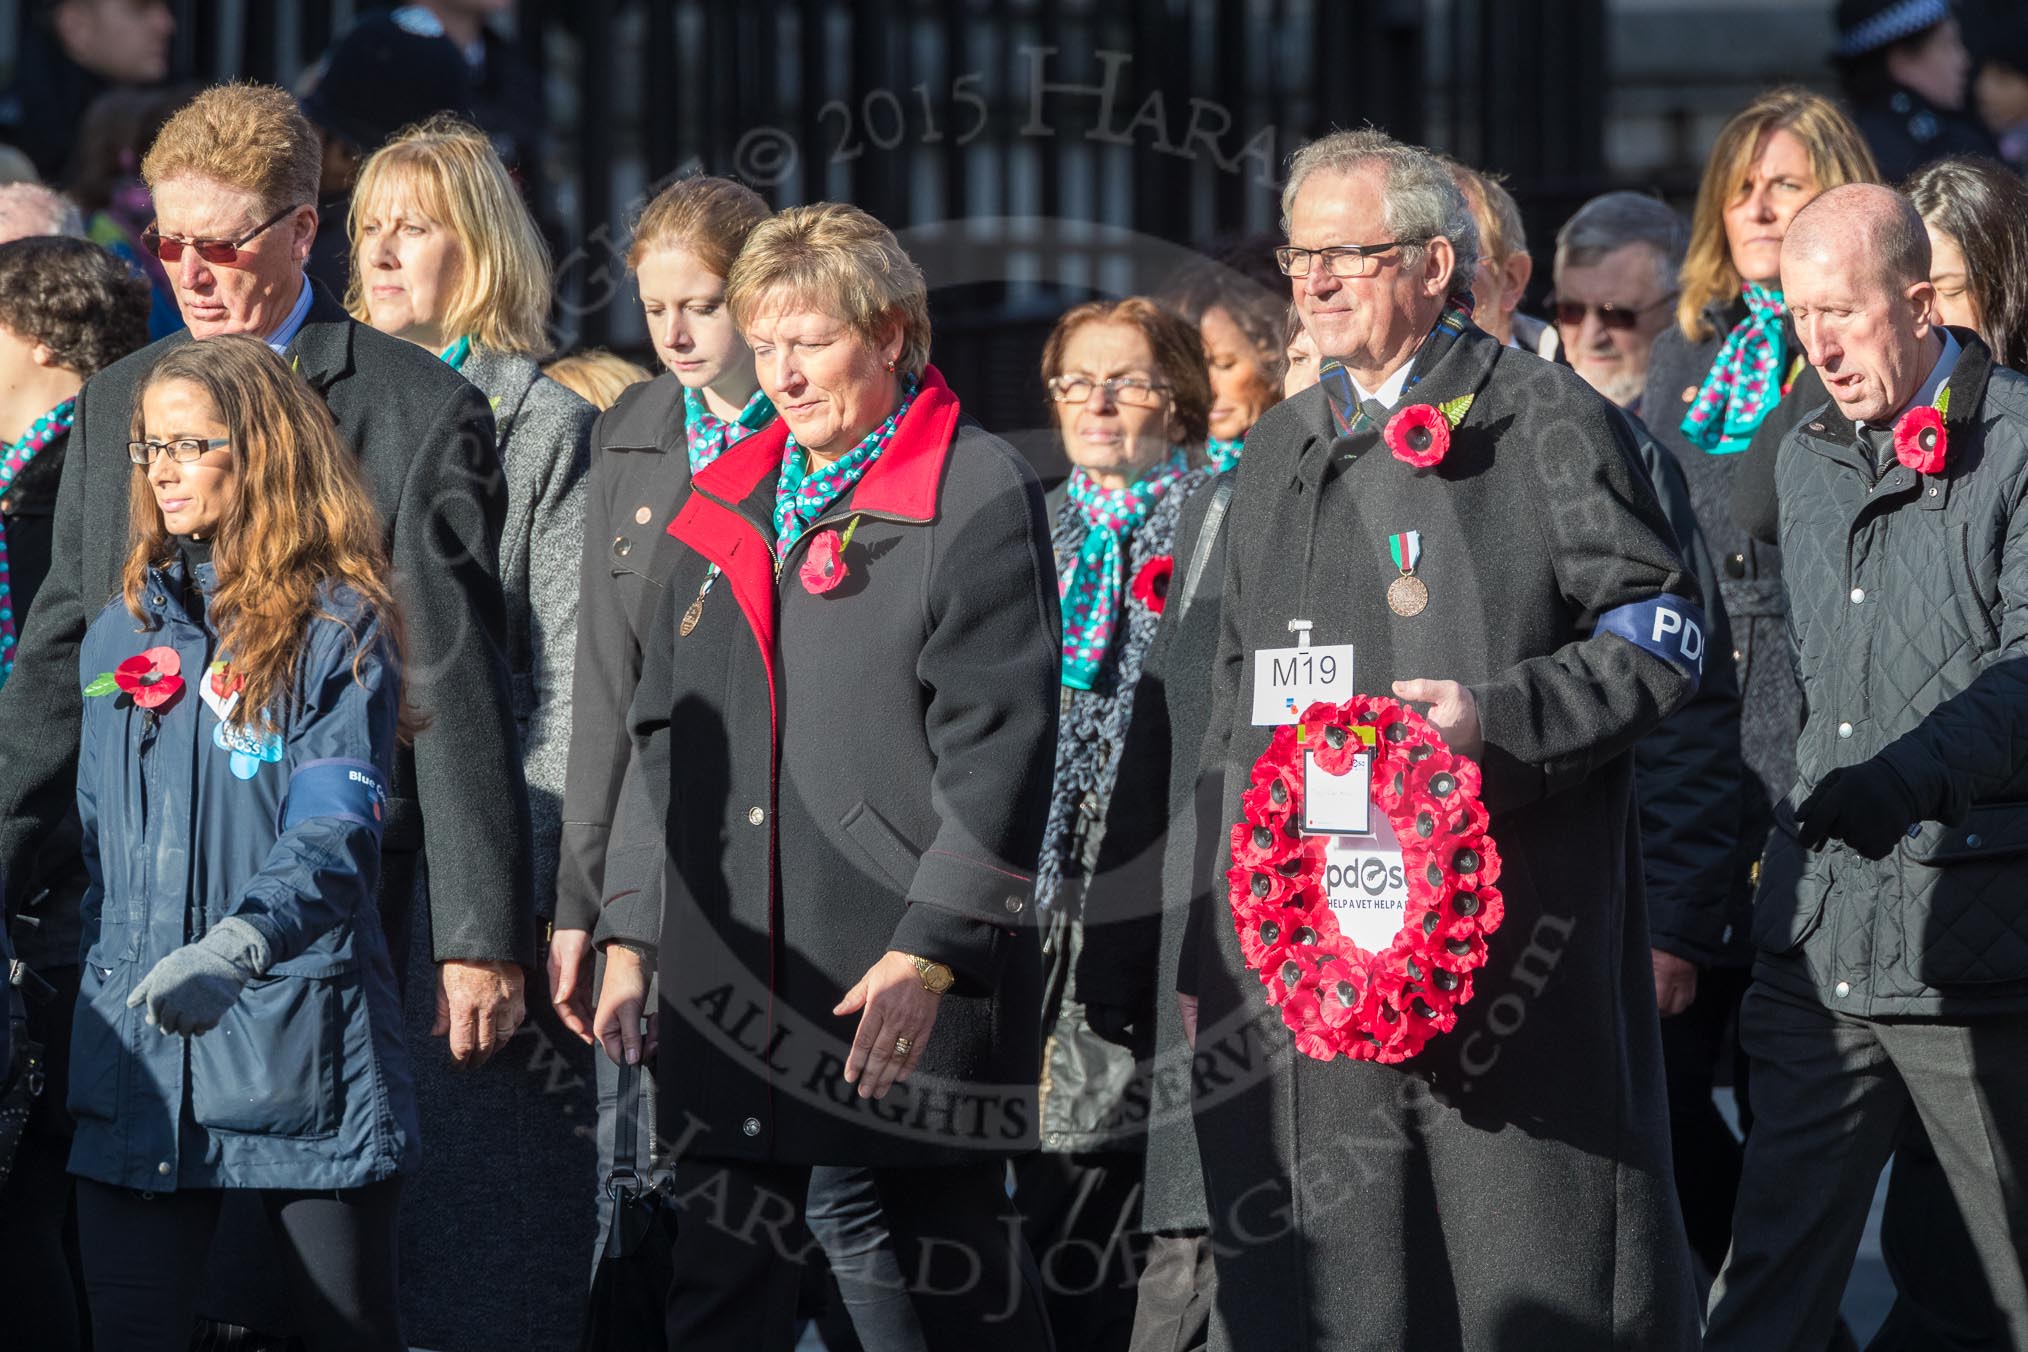 March Past, Remembrance Sunday at the Cenotaph 2016: M19 PDSA.
Cenotaph, Whitehall, London SW1,
London,
Greater London,
United Kingdom,
on 13 November 2016 at 13:16, image #2642